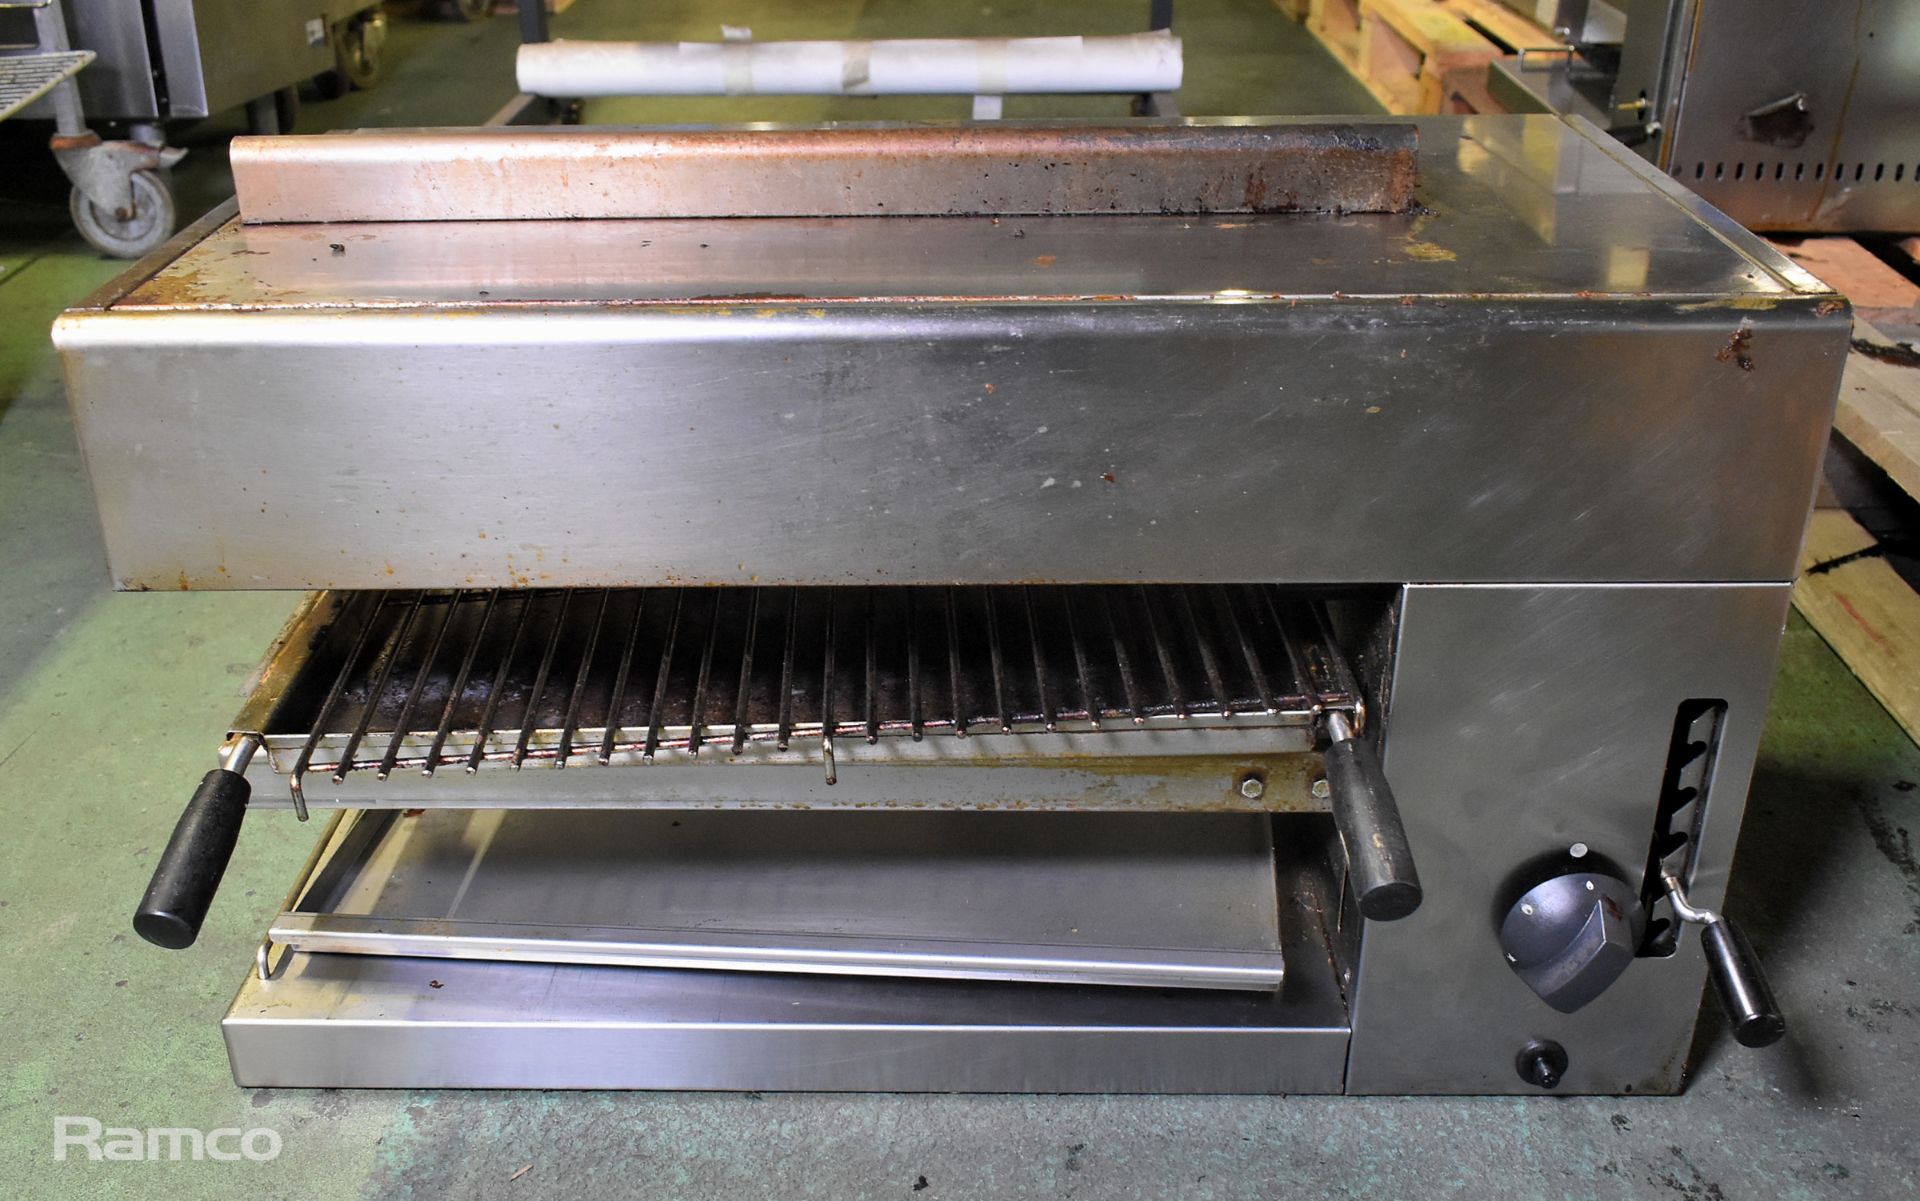 Stainless steel gas salamander grill - W 750 x D 500 x H 430mm - Image 2 of 6